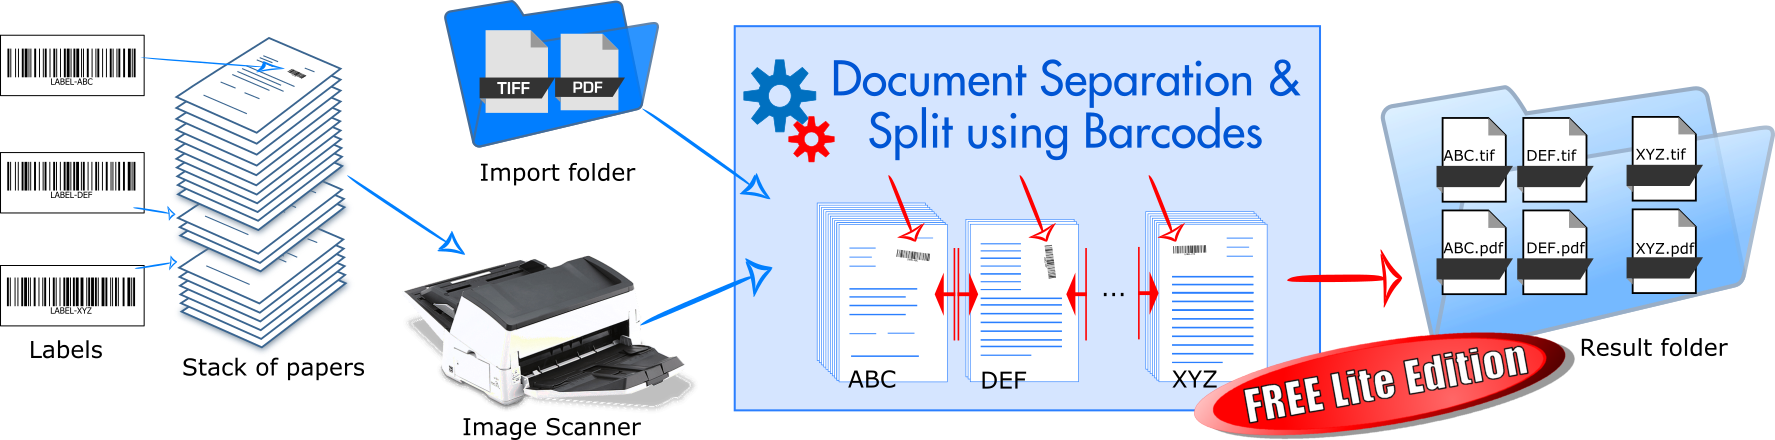 process flow  separating scanned business document images barcodes